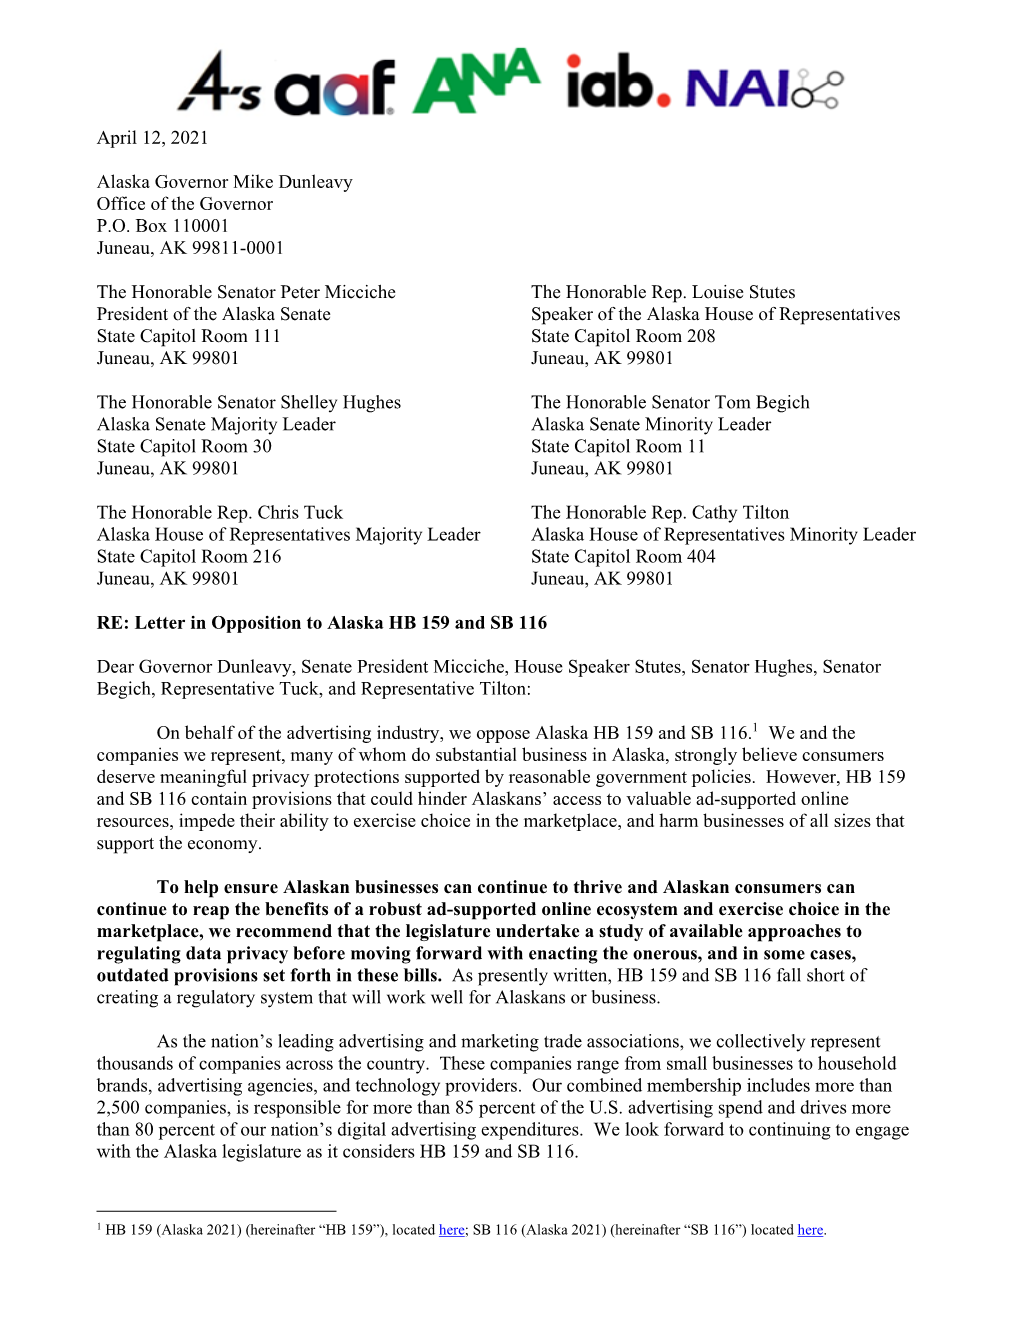 FINAL Joint Ad Trade Letter in Opposition to Alaska HB 159 And